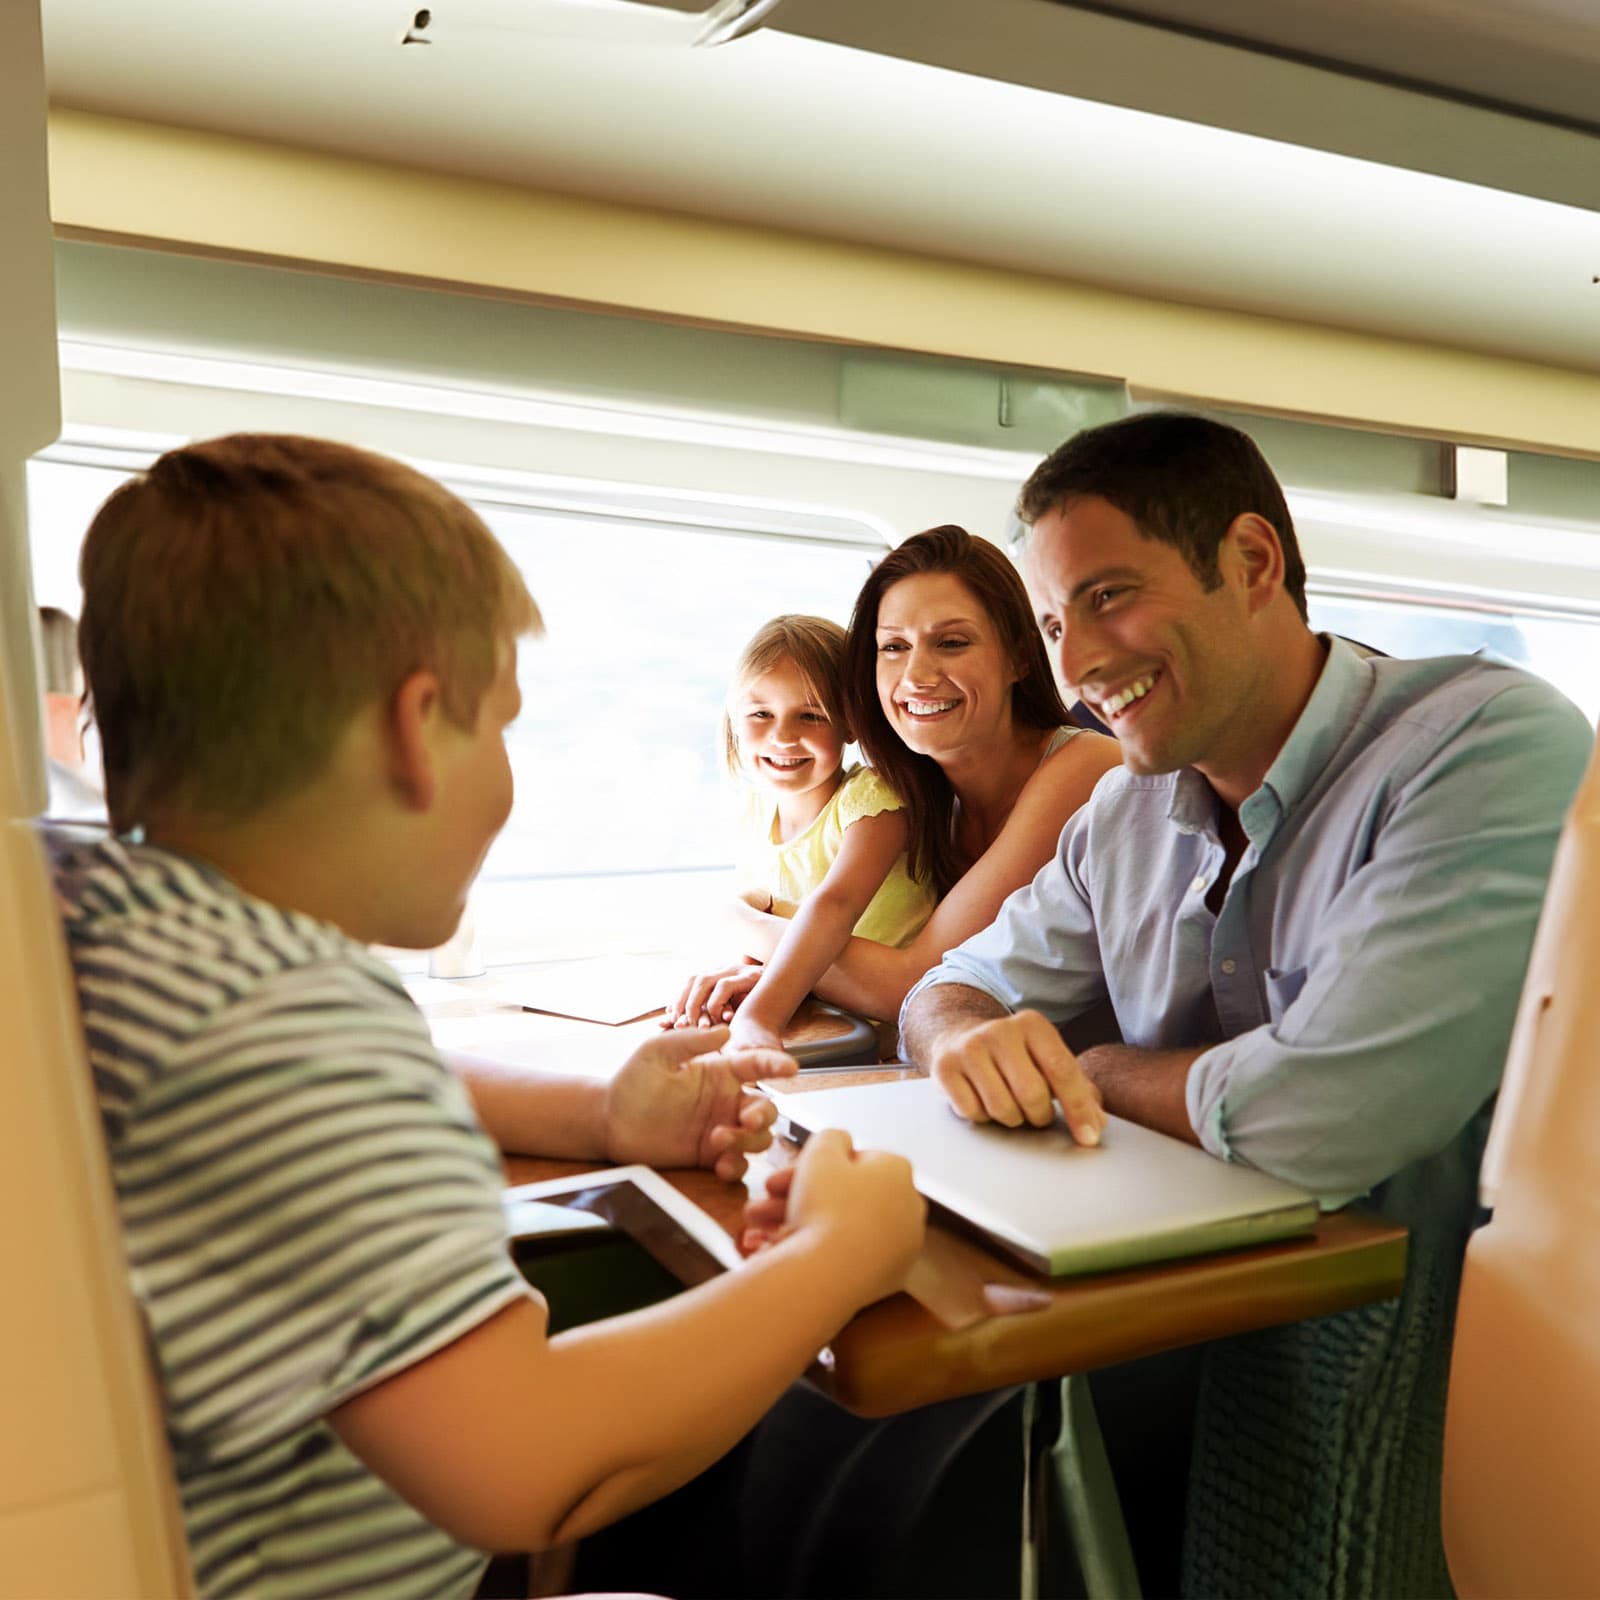 Family sitting across a table from one another on the train